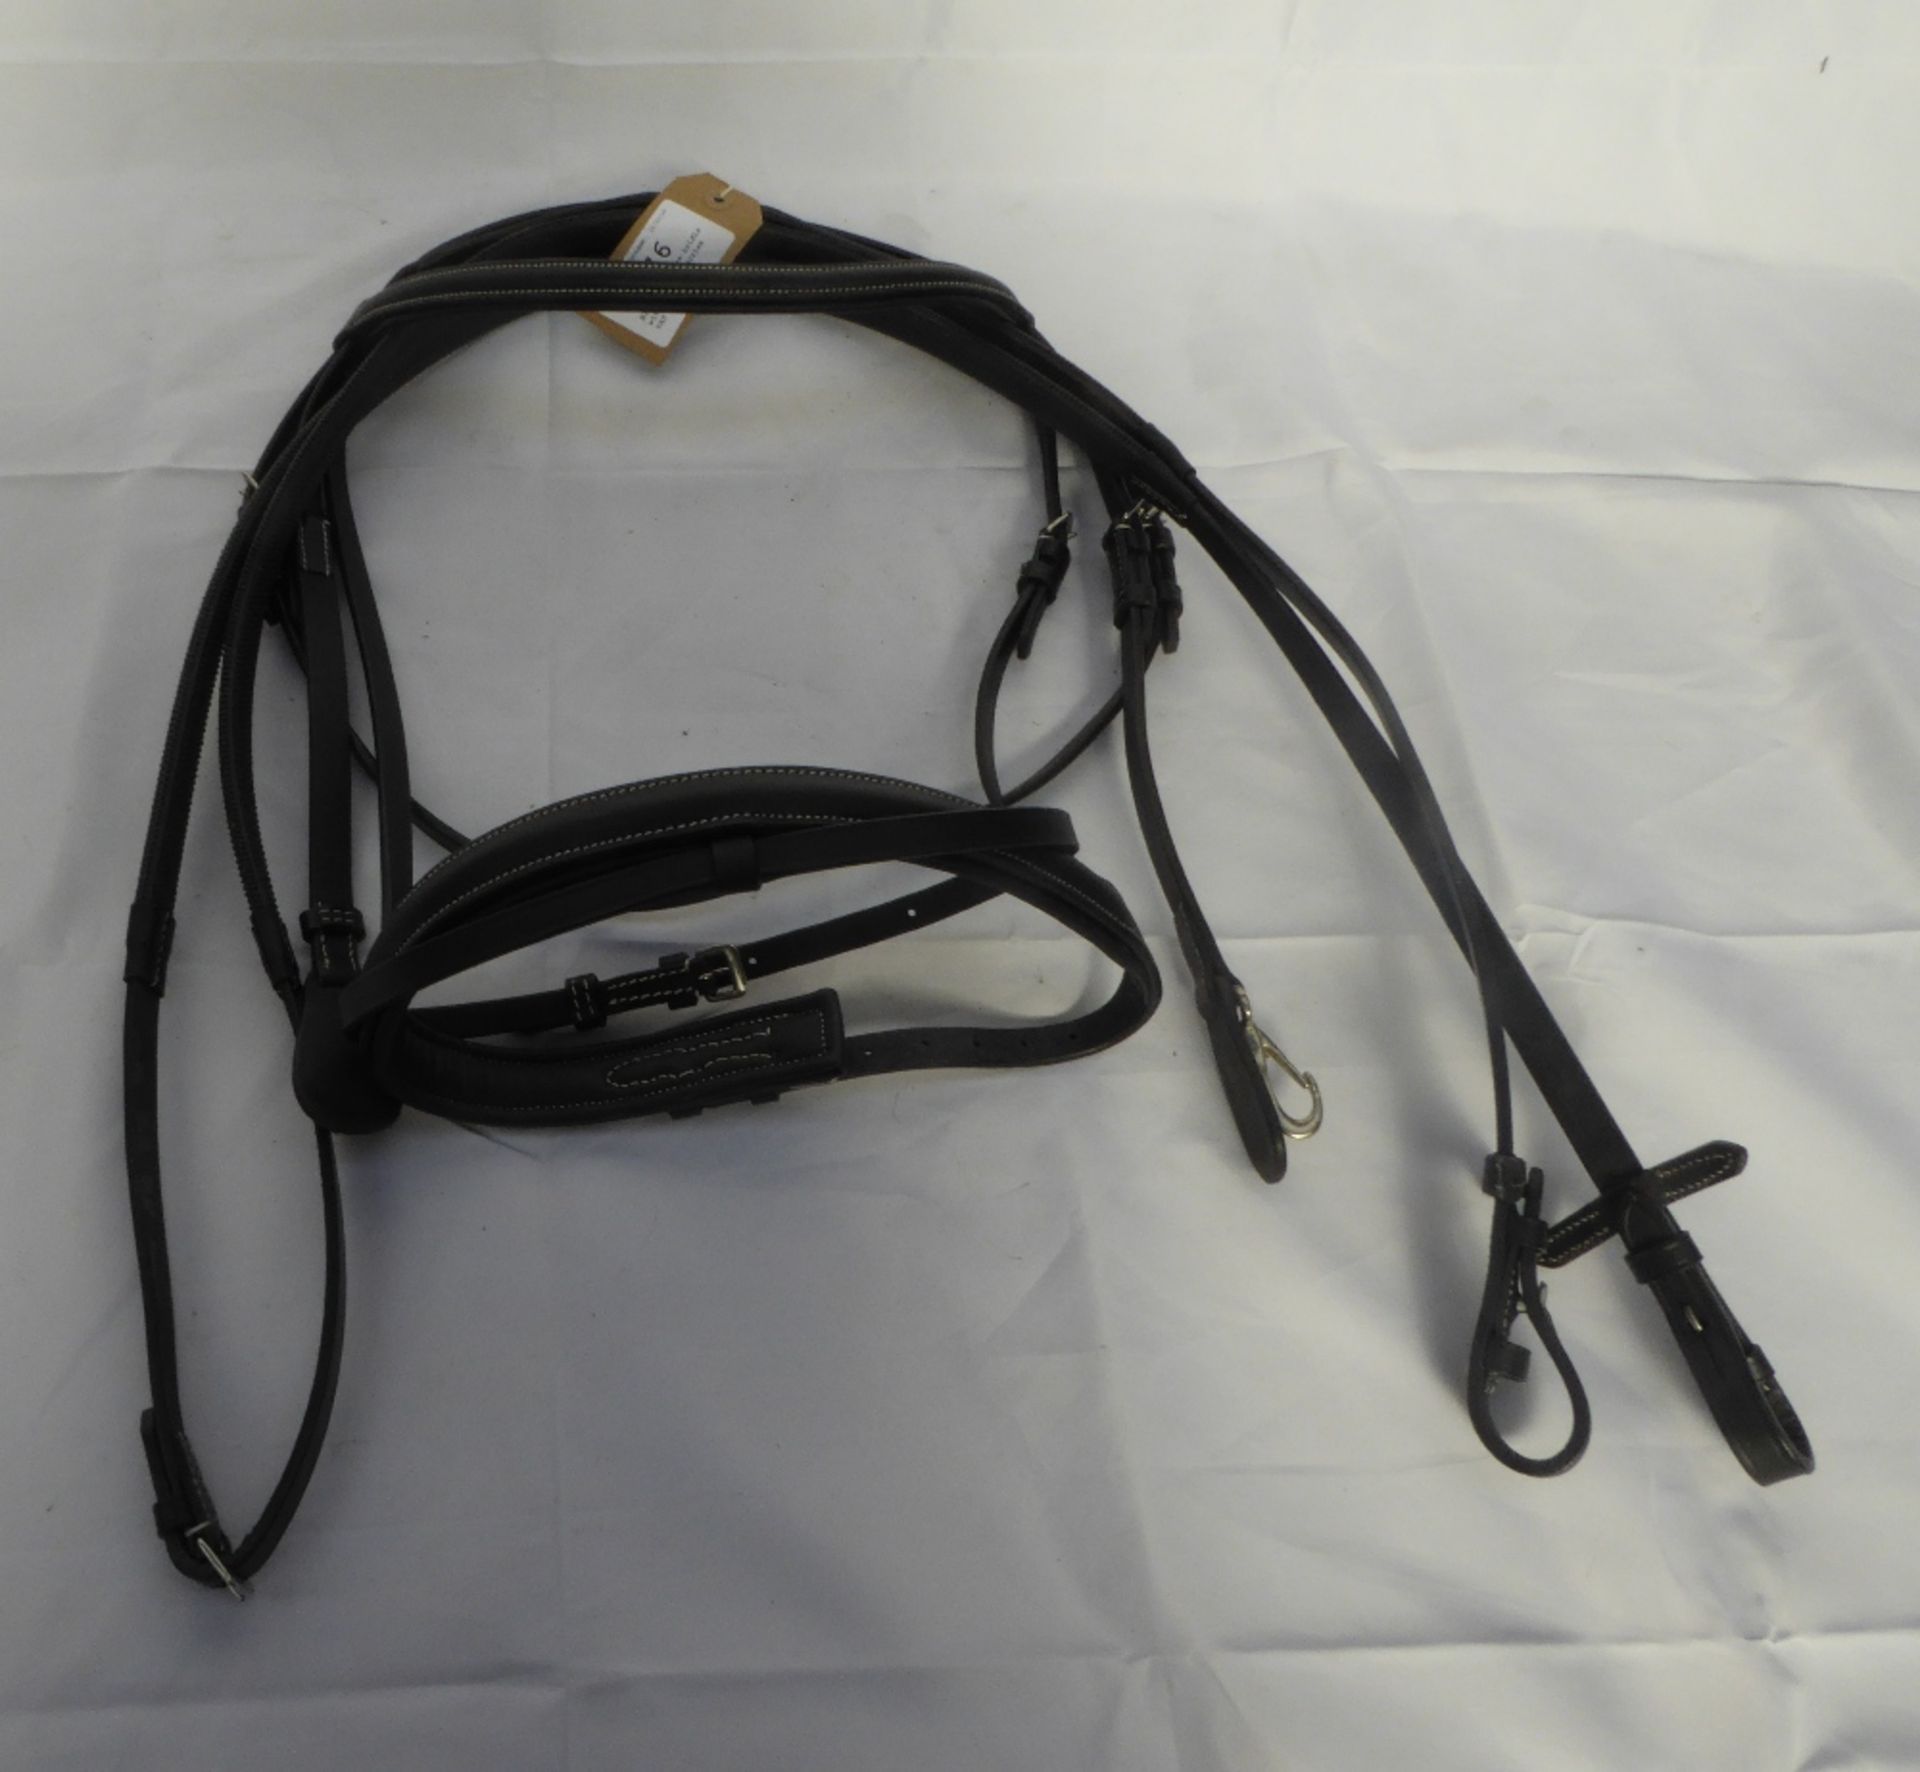 Black full size bridle with reins - carries VAT